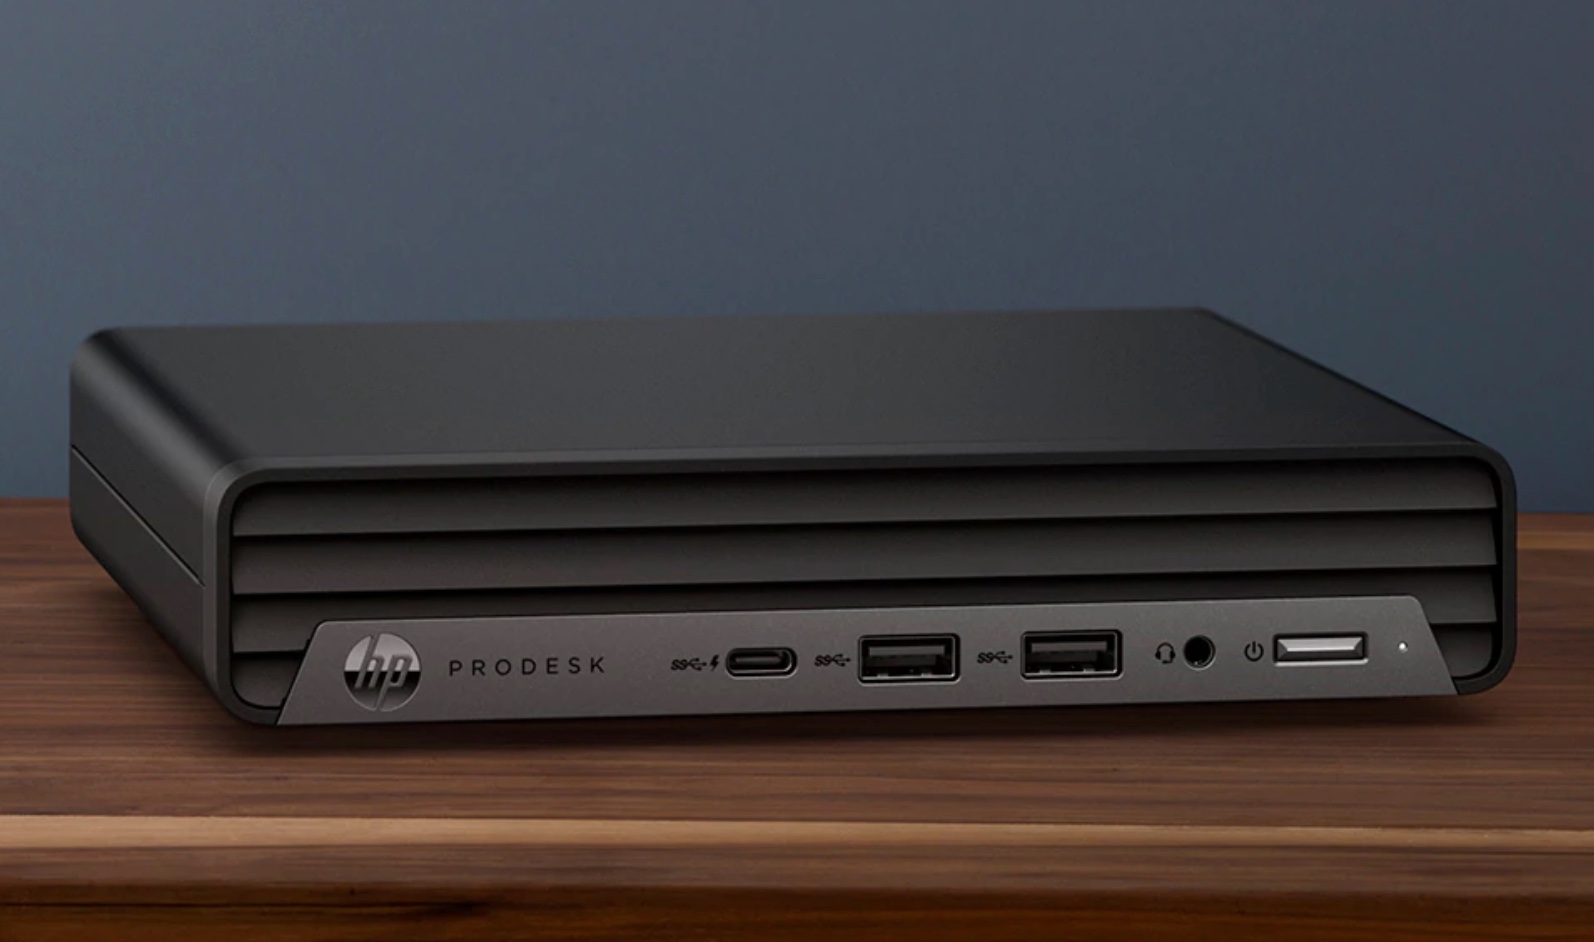 Choose HP desktops to customize your office or home workspace